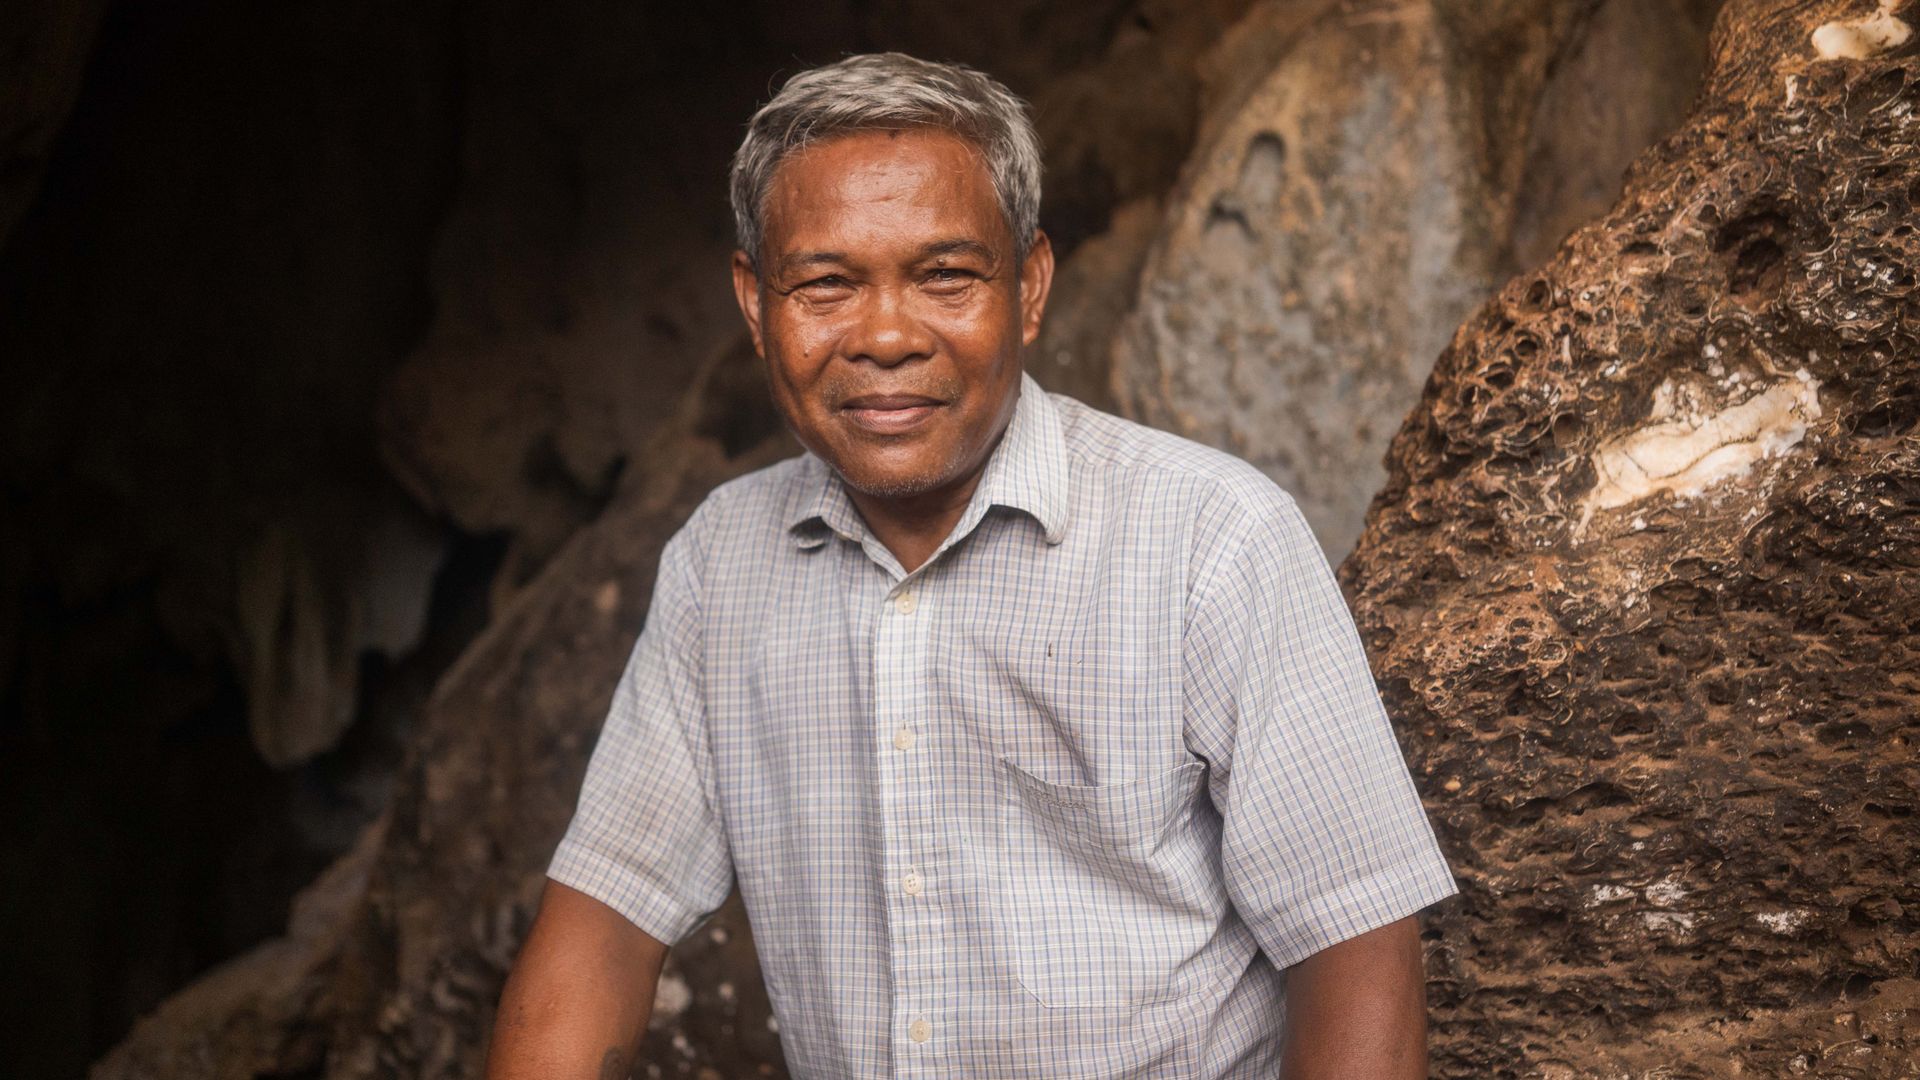 Tagbanua tribe council leader Darmo Manuel recounts the hardships of the past at a cave where his ancestors used to live in Coron, Palawan. PHOTO: VINA SALAZAR